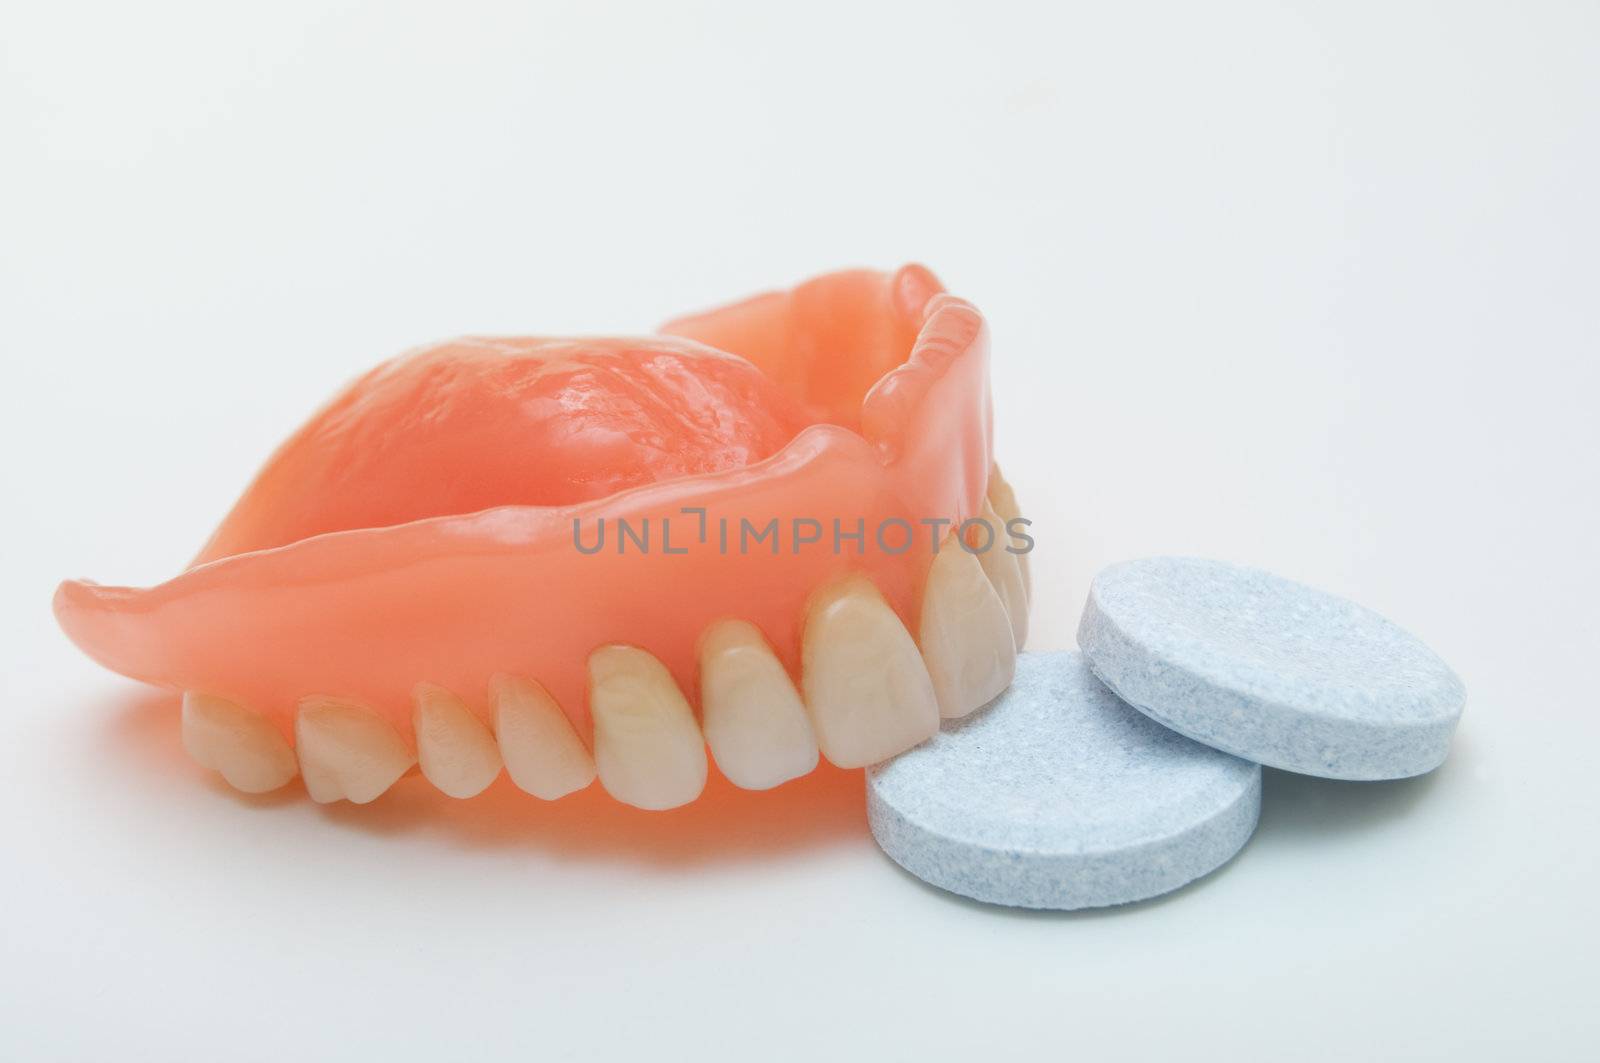 Close-up of denture with cleaning tablet